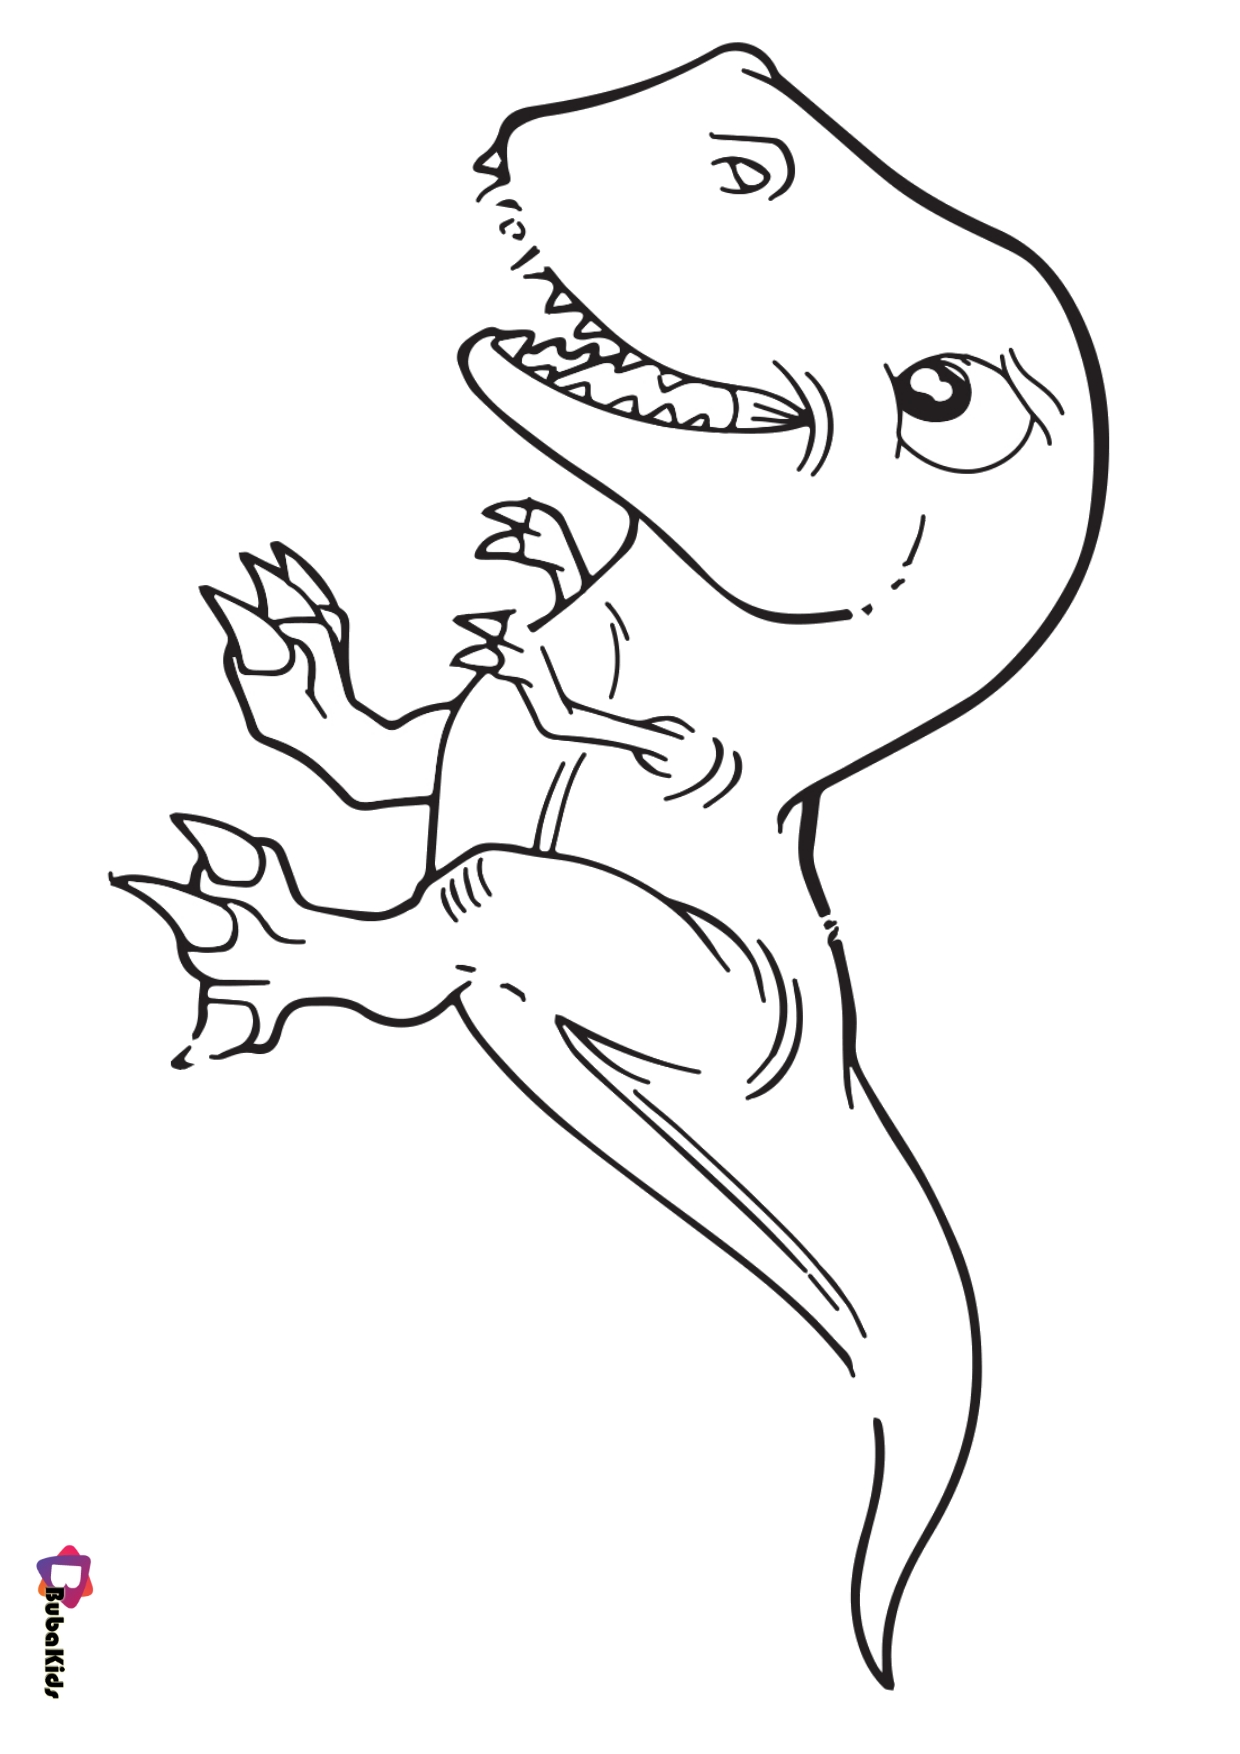 Cute baby dinosaur t-rex colouring page